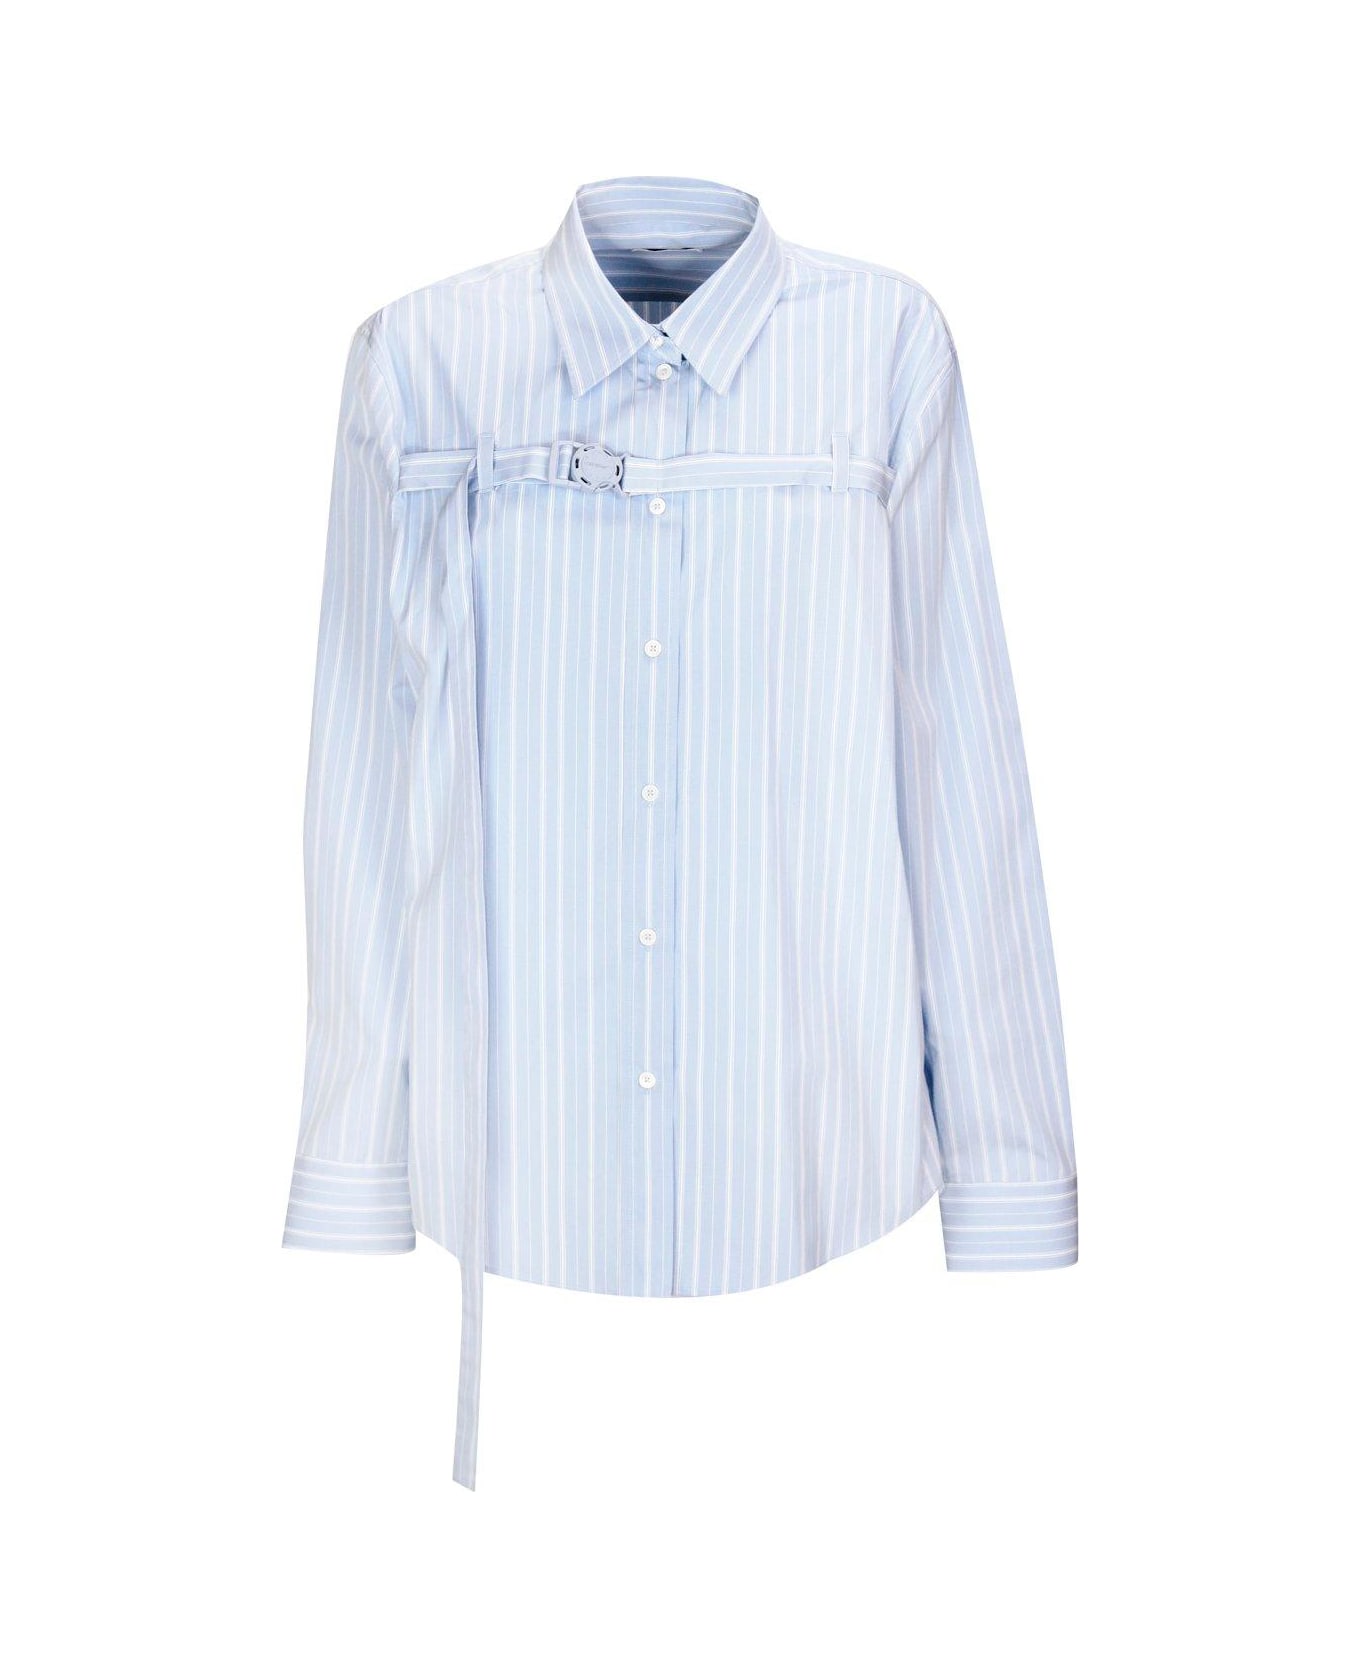 Off-White Cut-out Shirt - BLUE シャツ